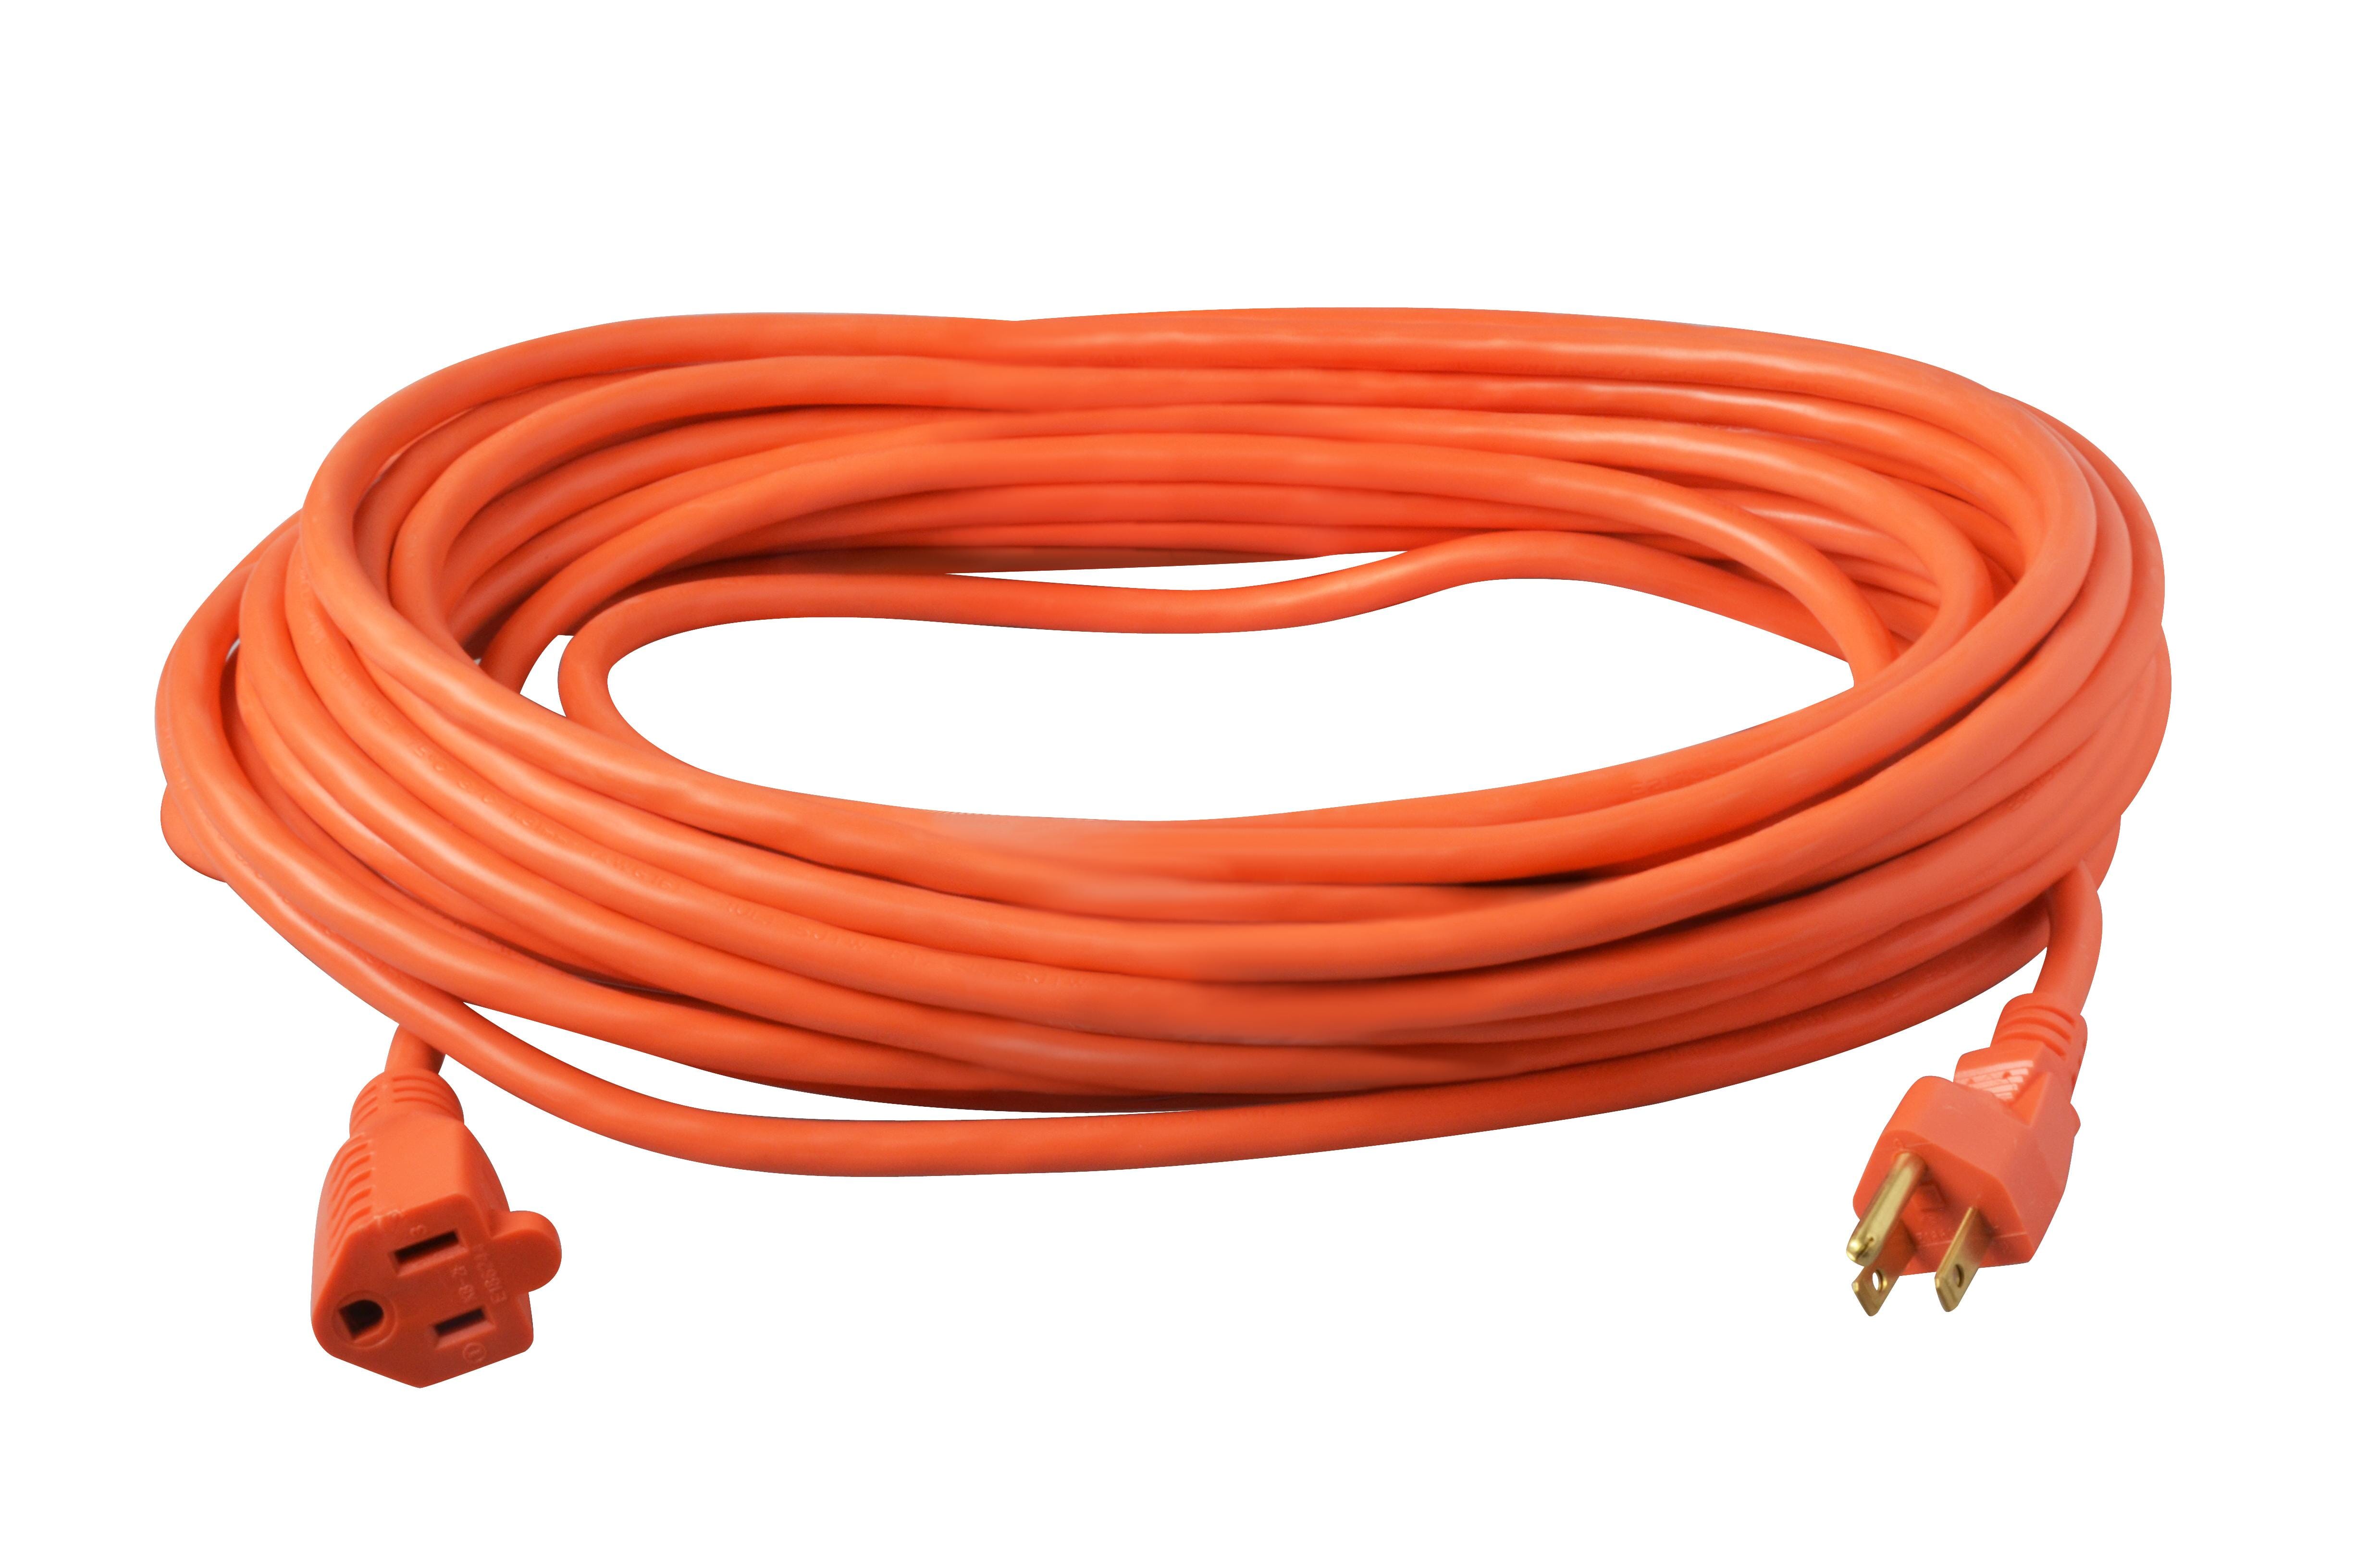 Southwire 2308SW8803 Type SJTW Extension Cord, 13 A at 125 VAC, 1625 W, 50 ft L Cord, 3 Conductors